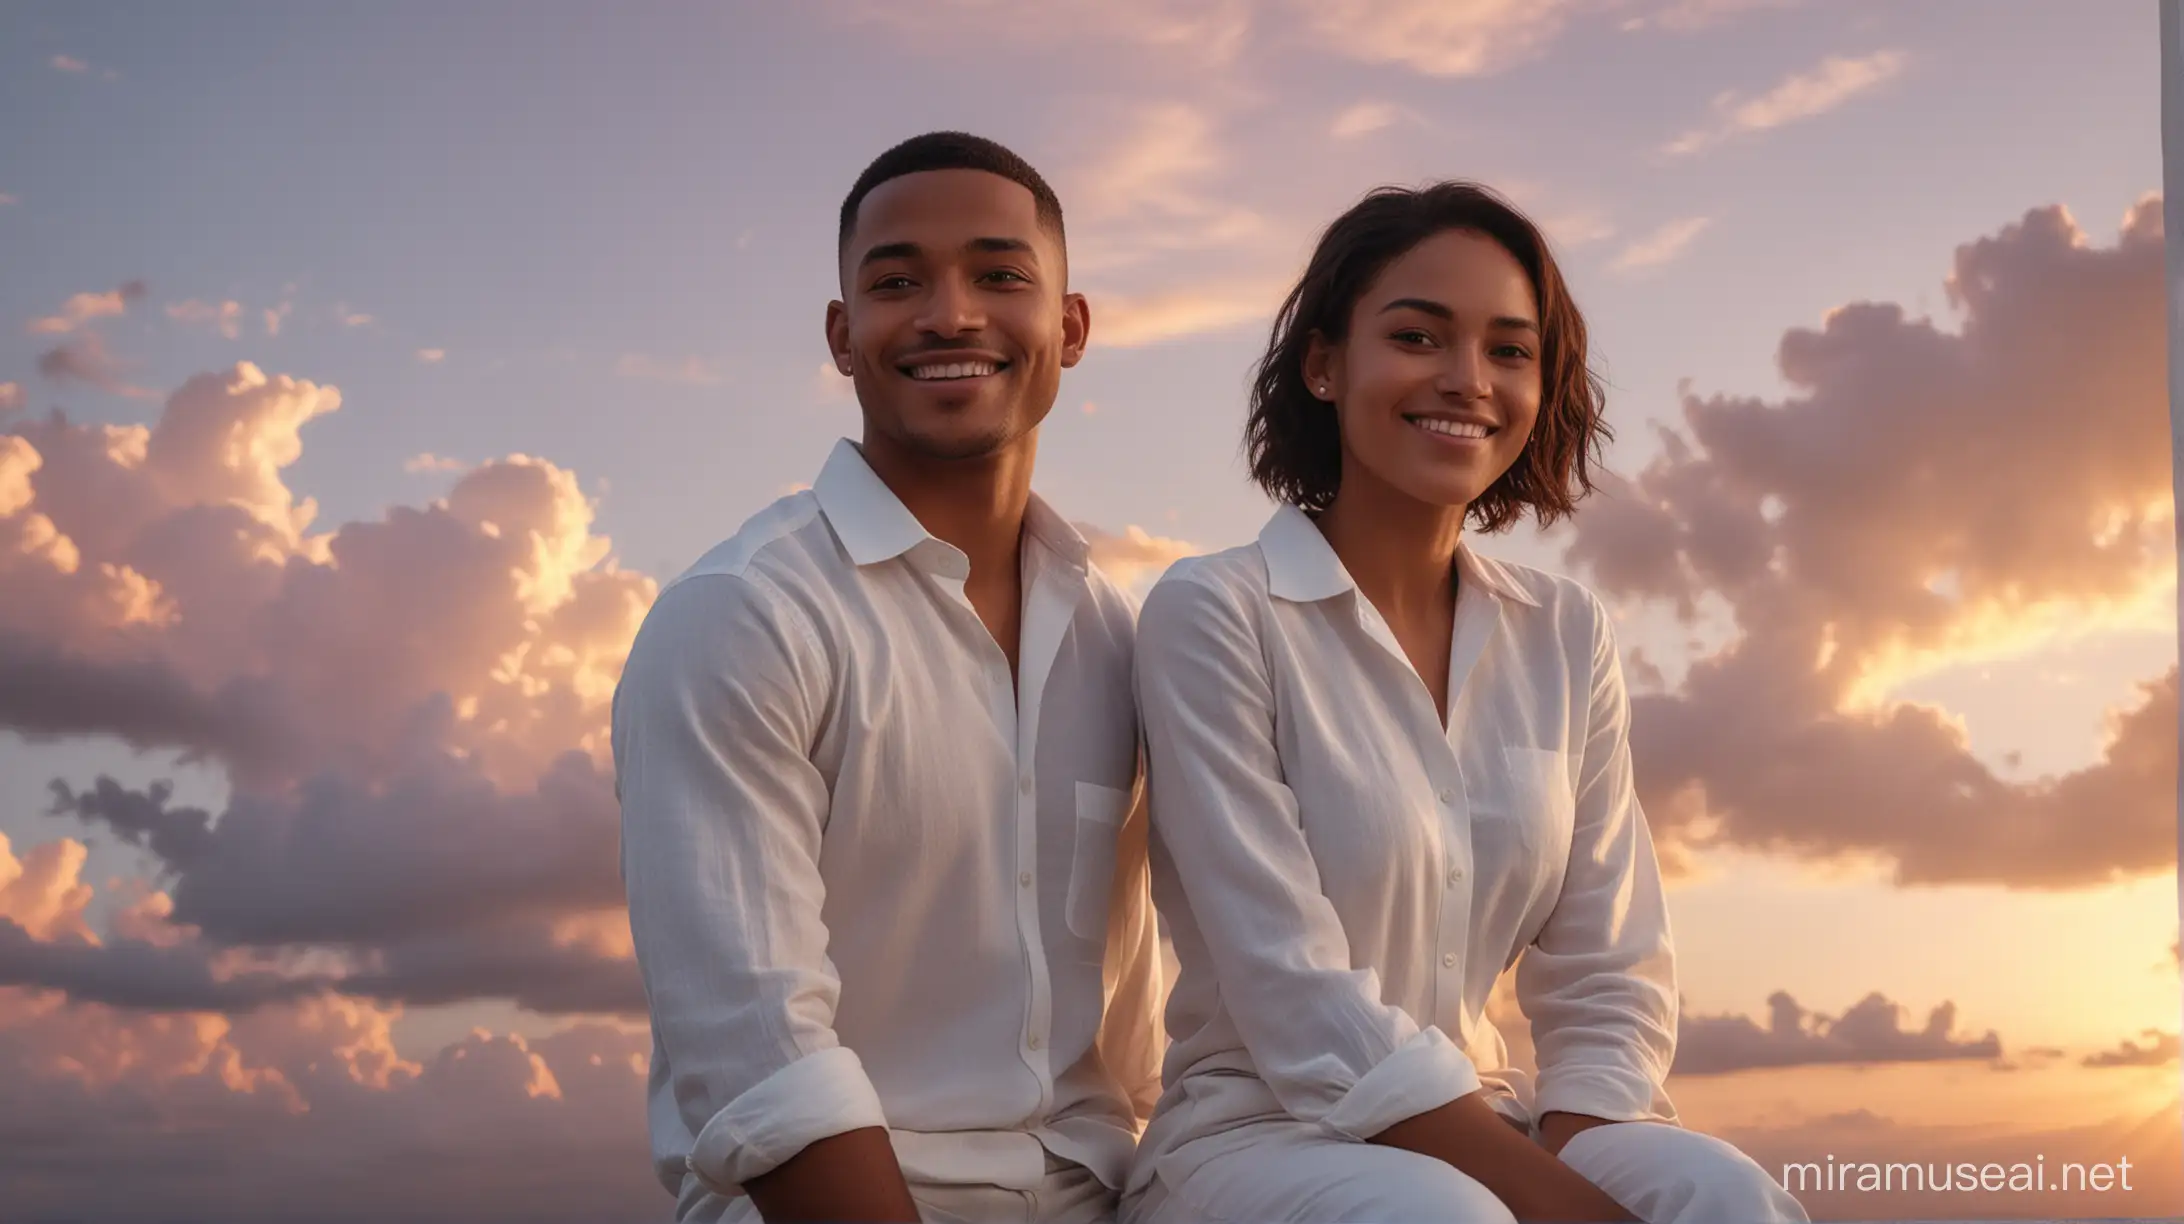 Hyper realistic, wide shot, from behind, of a happy smiling cute round faced, clean shaven, 30 years old, young African American businessman with buzzcut hair, he is wearing white linen shirt and pants, he is sitting in the sky on a cloud watching the sunset, with amazing beautiful happy smiling Columbian woman with long black hair, she is wearing a high neck white linen collared shirt with long sleeve and pants, they have their backs to the camera, highly realistic eyes, accurate nose, pink clouds, accurate mouth, cinematic shot, sharp focus, fine details, 8k, HDR, realism, realistic, film still, depth of field, unreal engine, f/11, key visual, superb cinematic color grading, dynamic lighting, 75mm, Technicolor, Panavision, cinemascope, action movie screenshot, Canon EOS R6